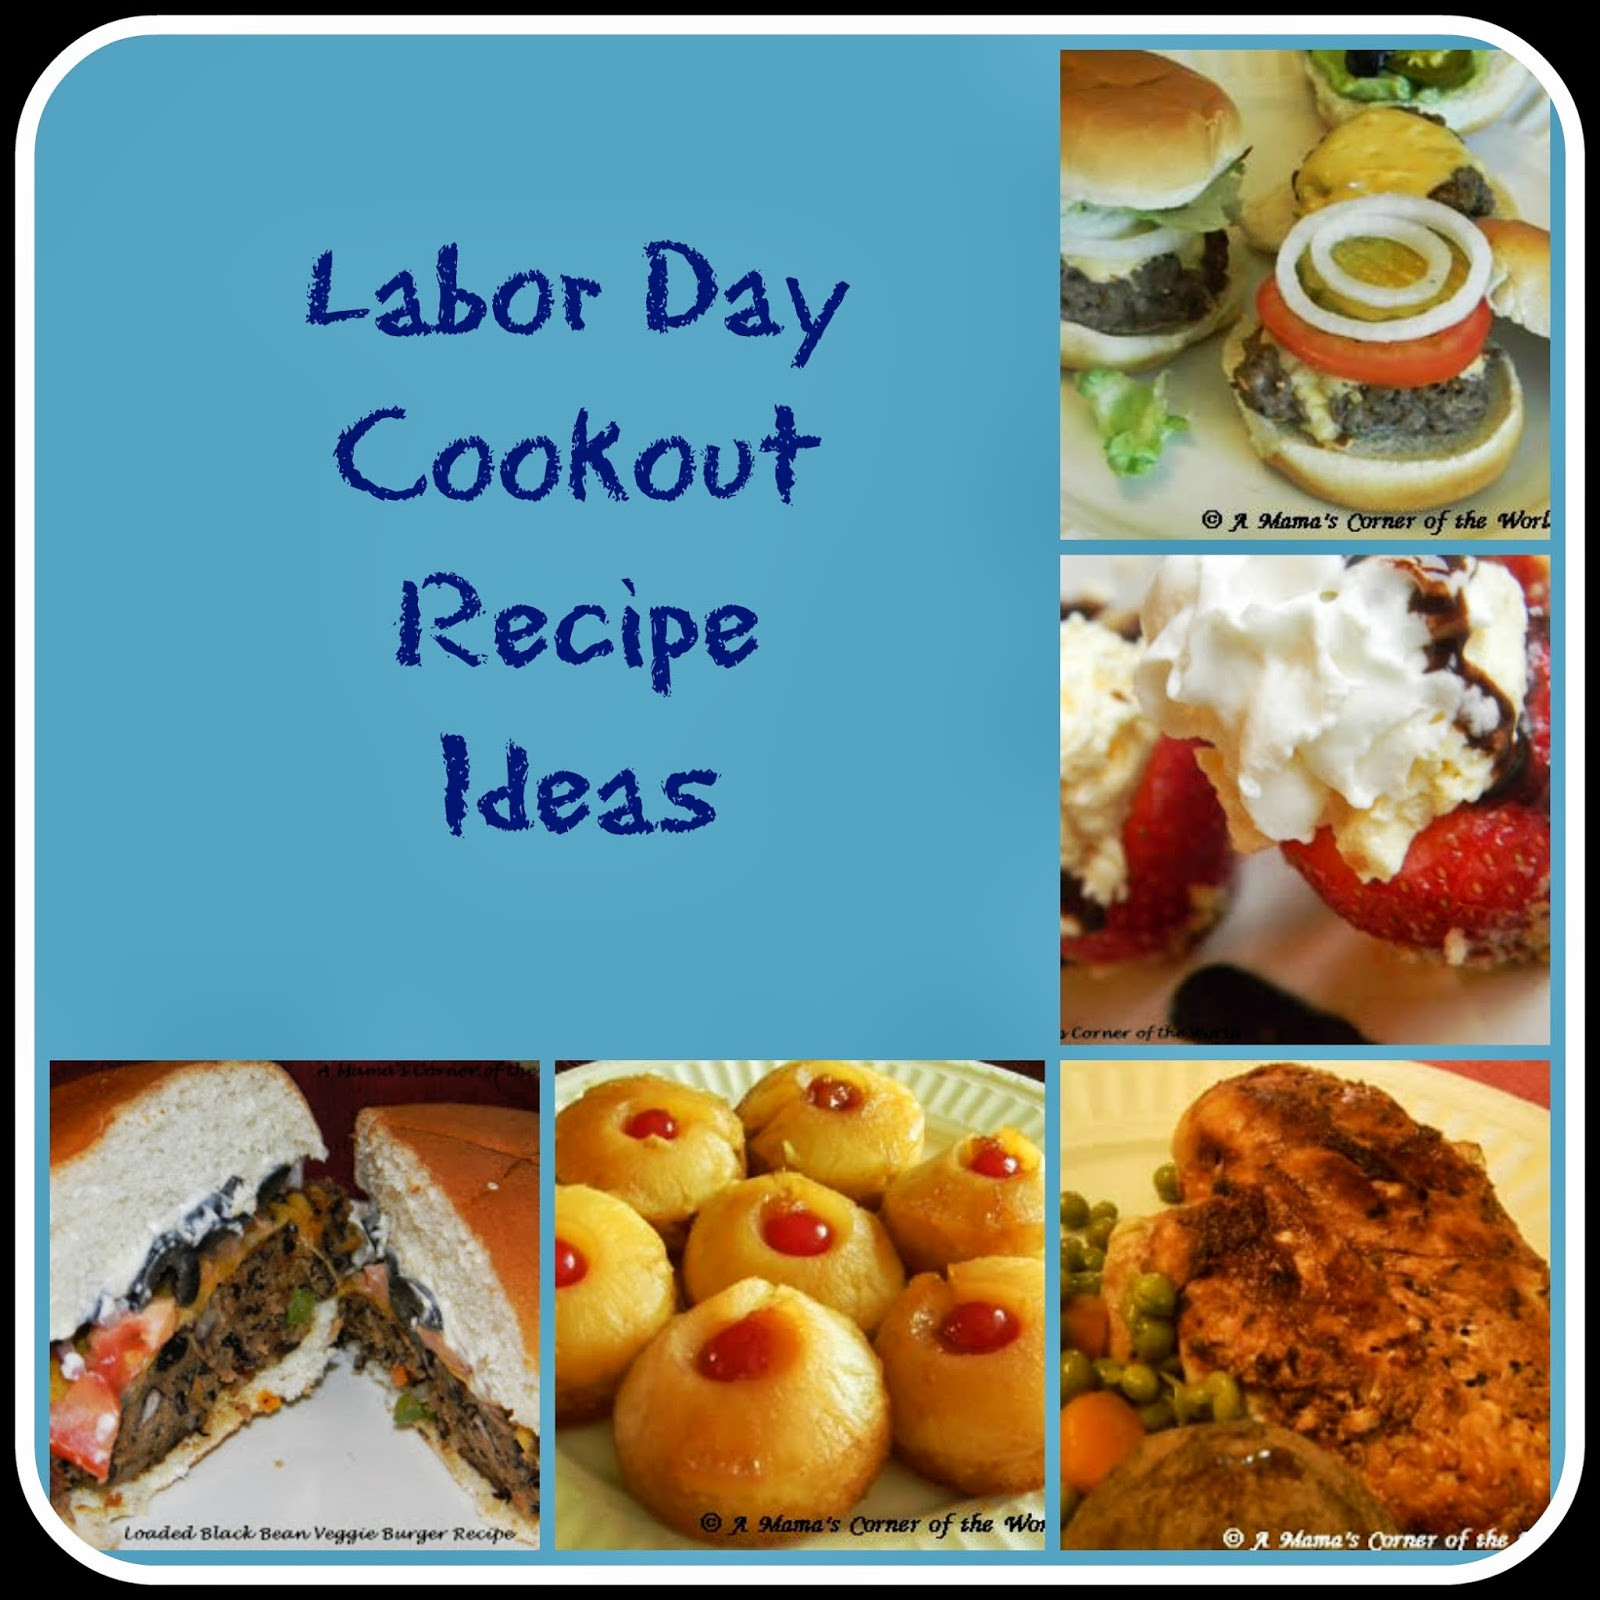 Labor Day Cookout Menu Ideas
 Labor Day Cookout Recipe Ideas A Mama s Corner of the World